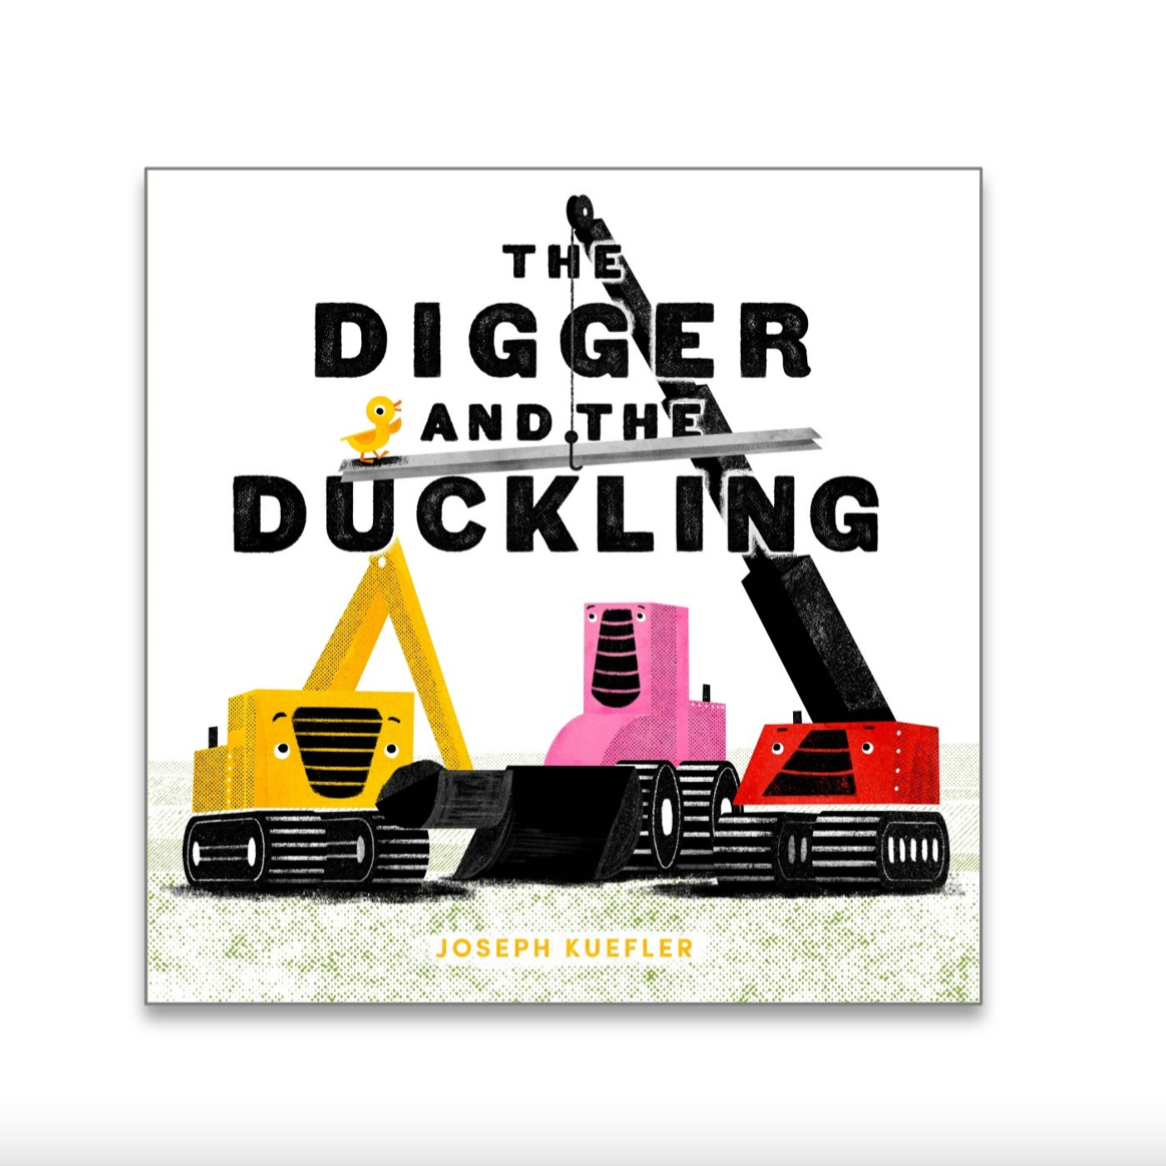 THE DIGGER AND THE DUCKLING